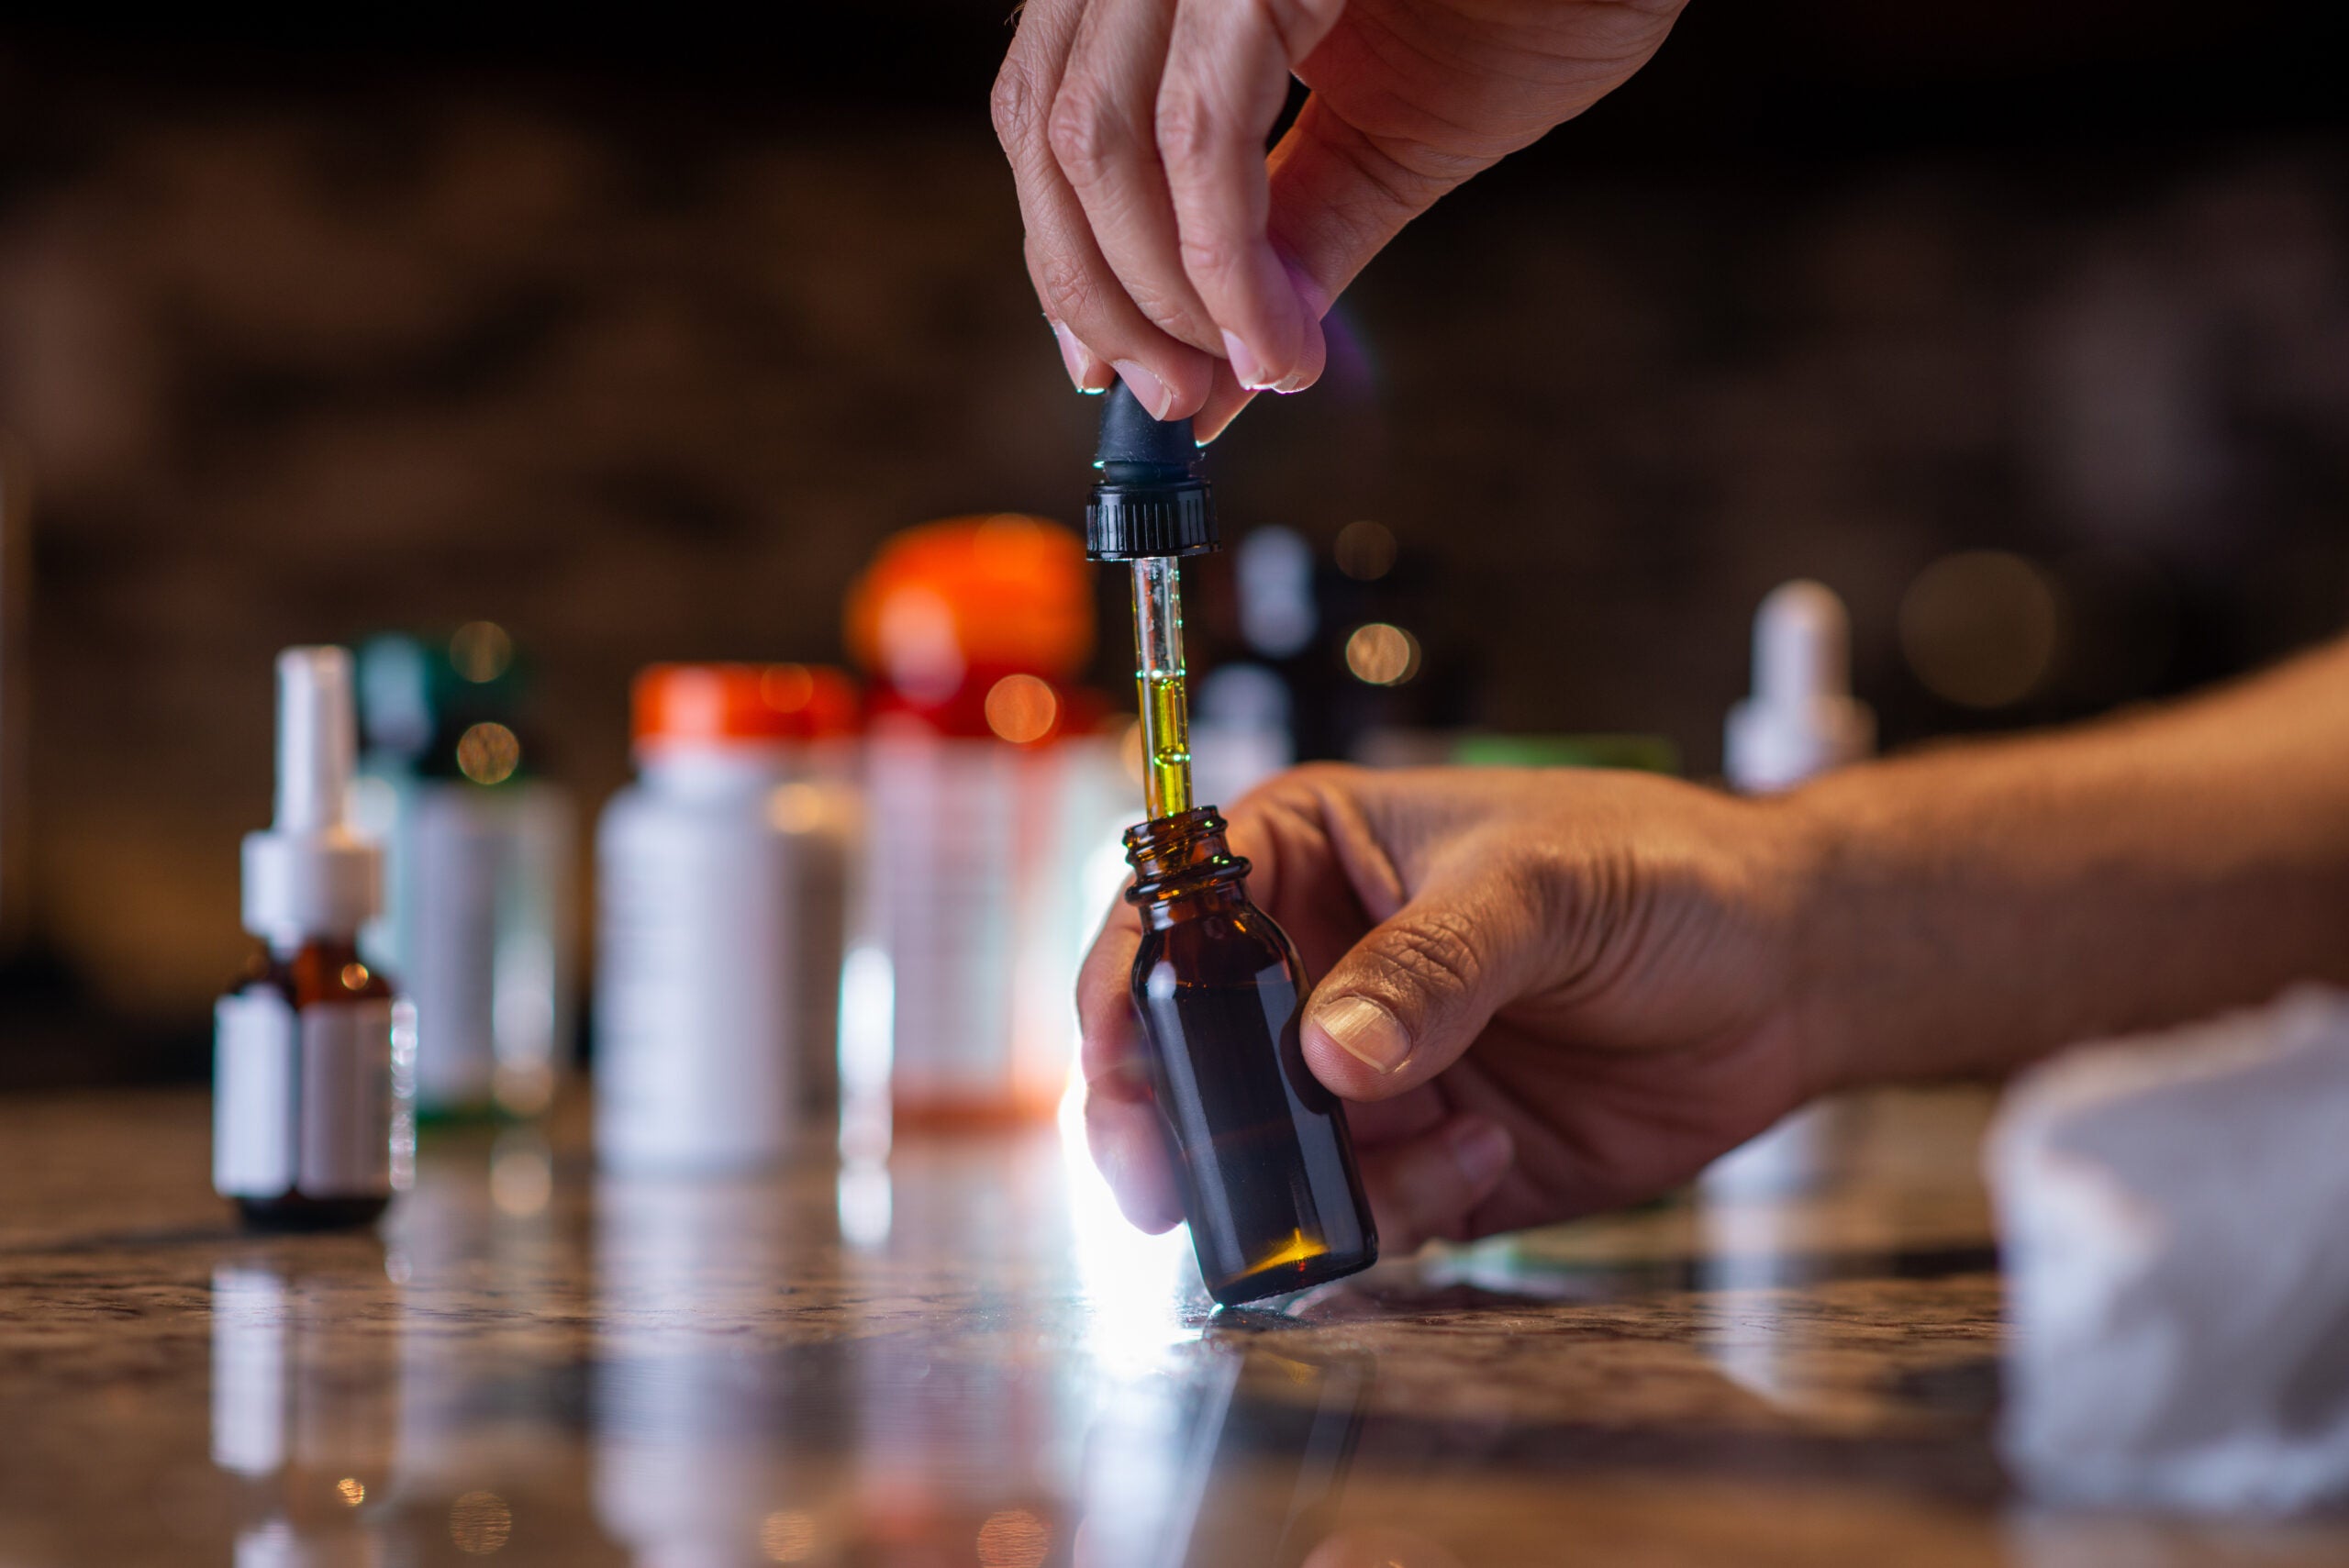 FDA Rejects Bid To Sell CBD As Dietary Supplement